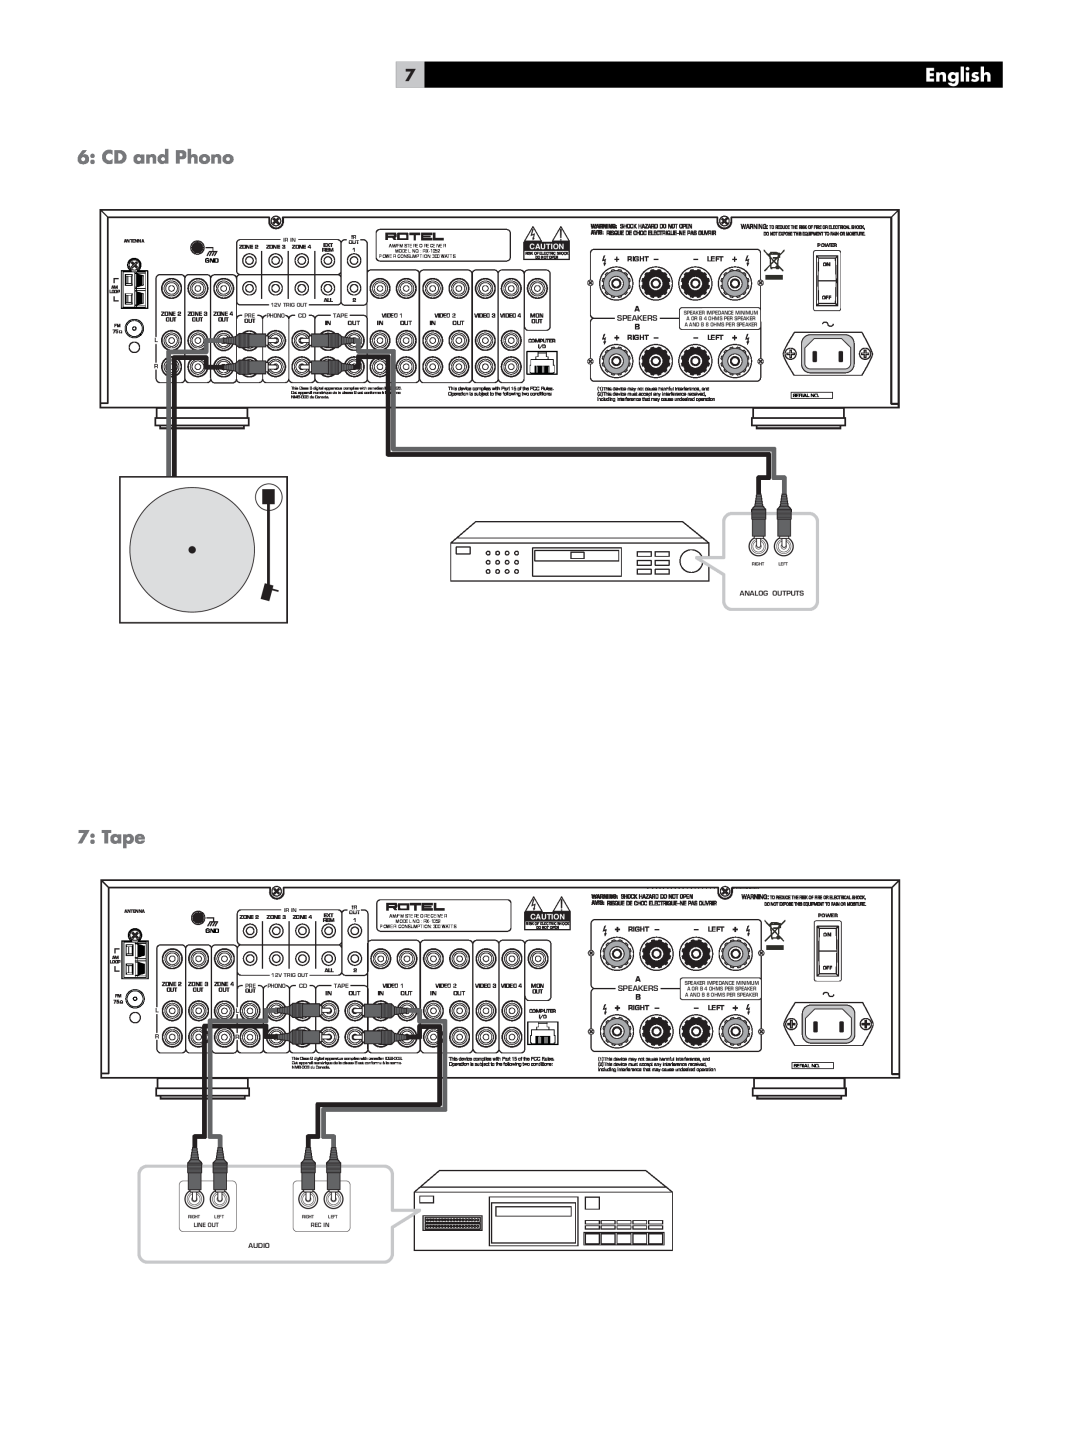 Rotel owner manual CD and Phono, Tape, English, Am/Fm Stereo Receiver, MODEL NO. RX-1052, POWER CONSUMPTION 300 WATTS 